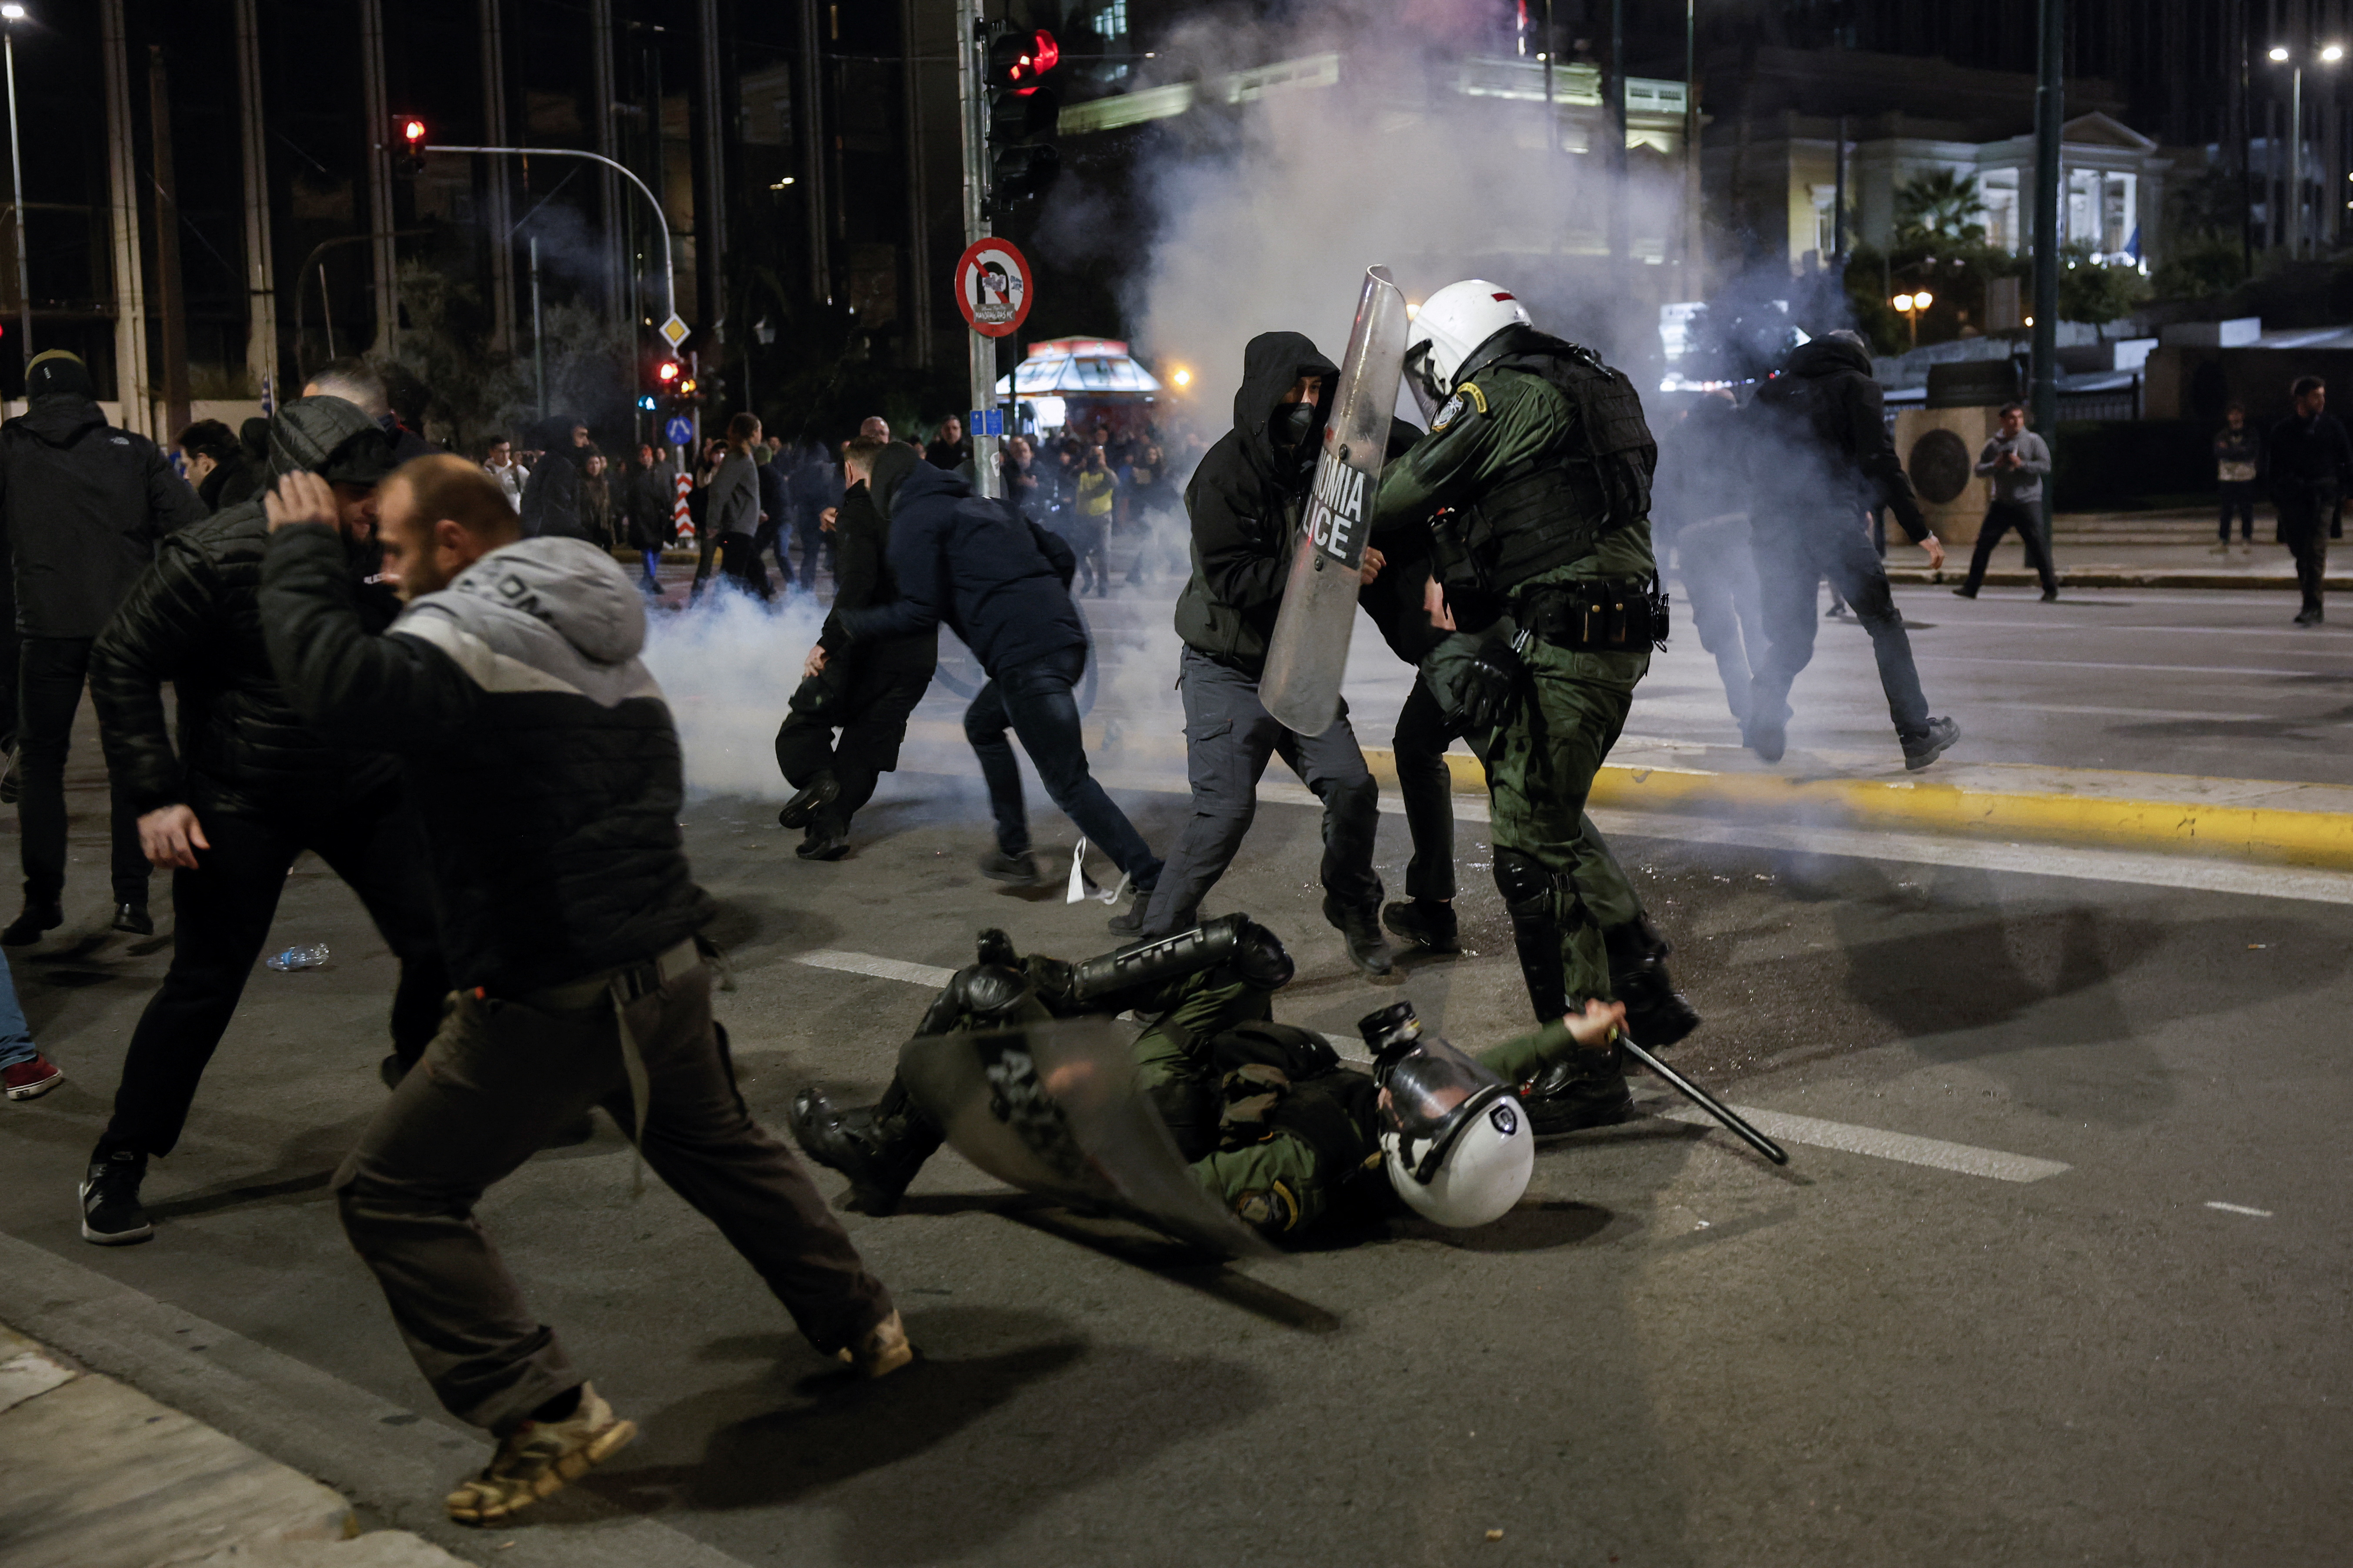 Demonstrators clash with police during a demonstration following a train accident near the city of Larissa in Athens